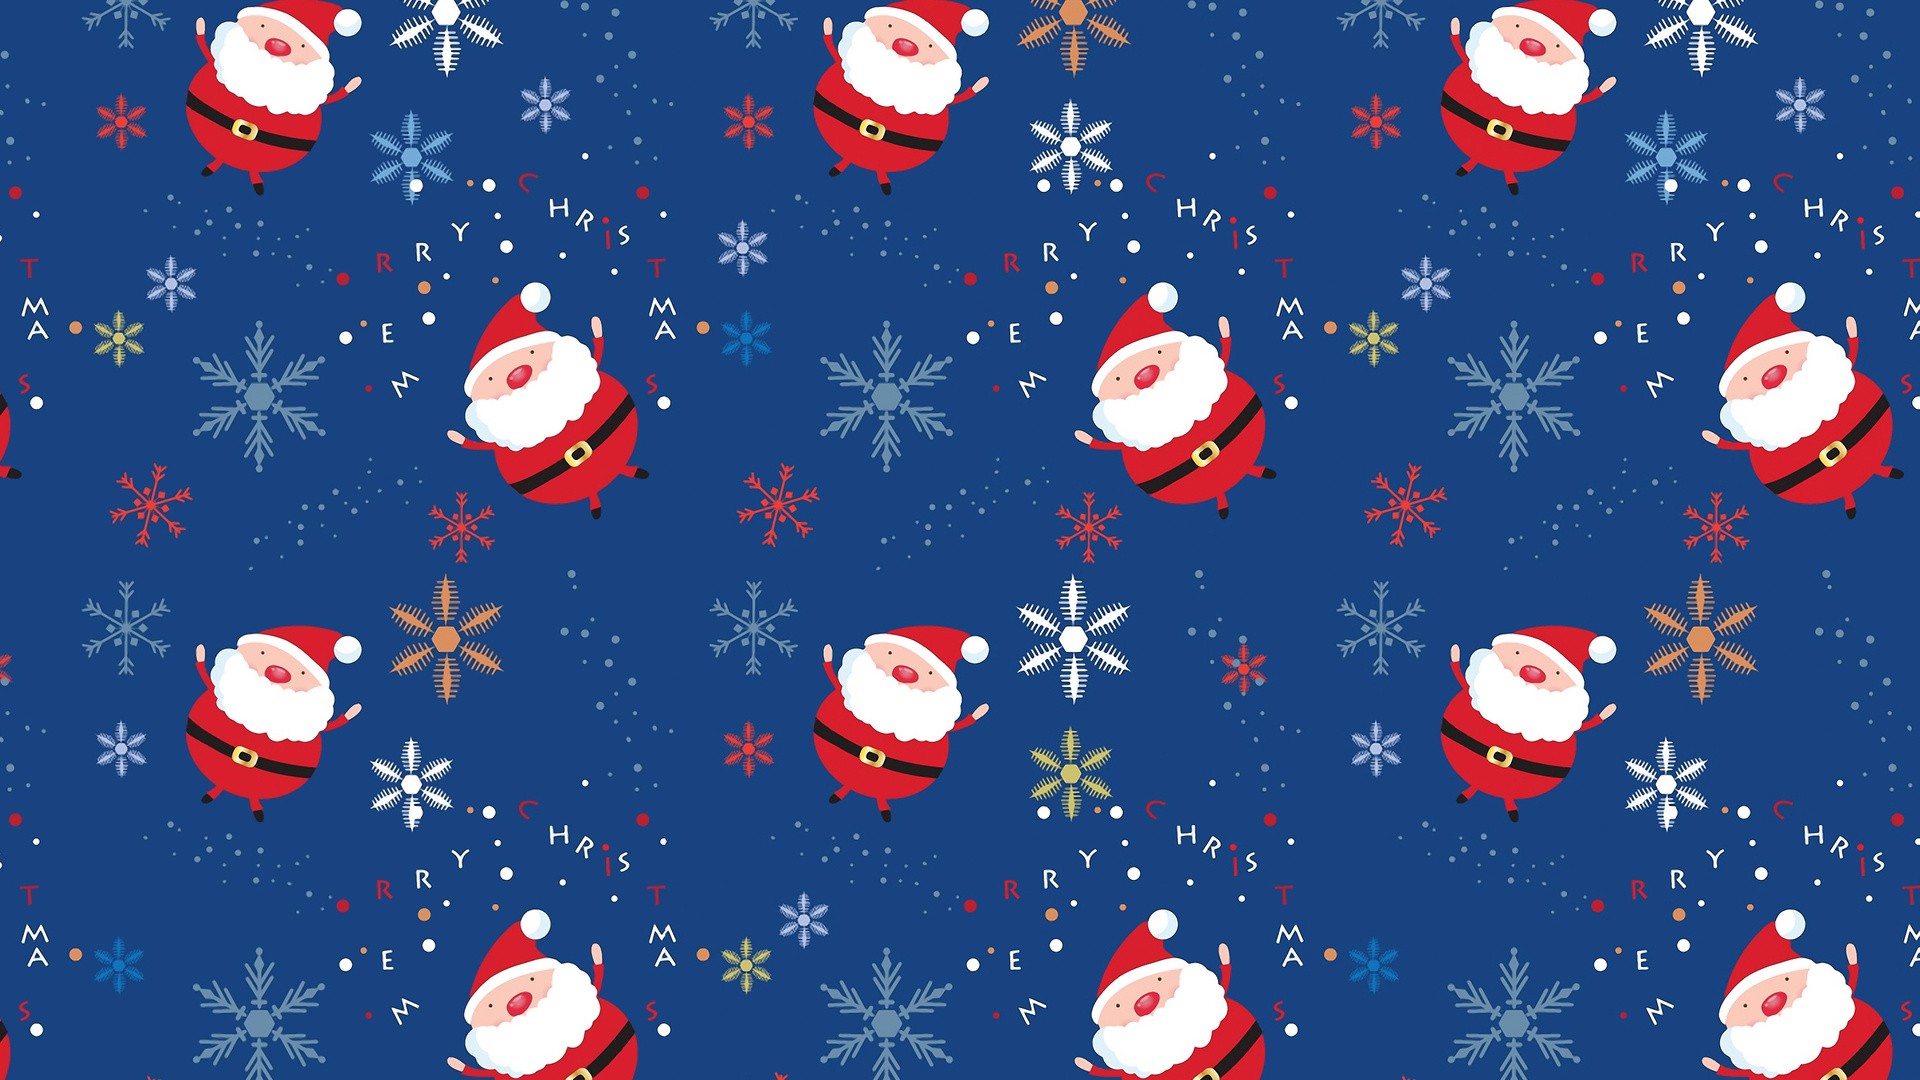 Free download HD Cute Christmas Background Amazing Images Smart Phone